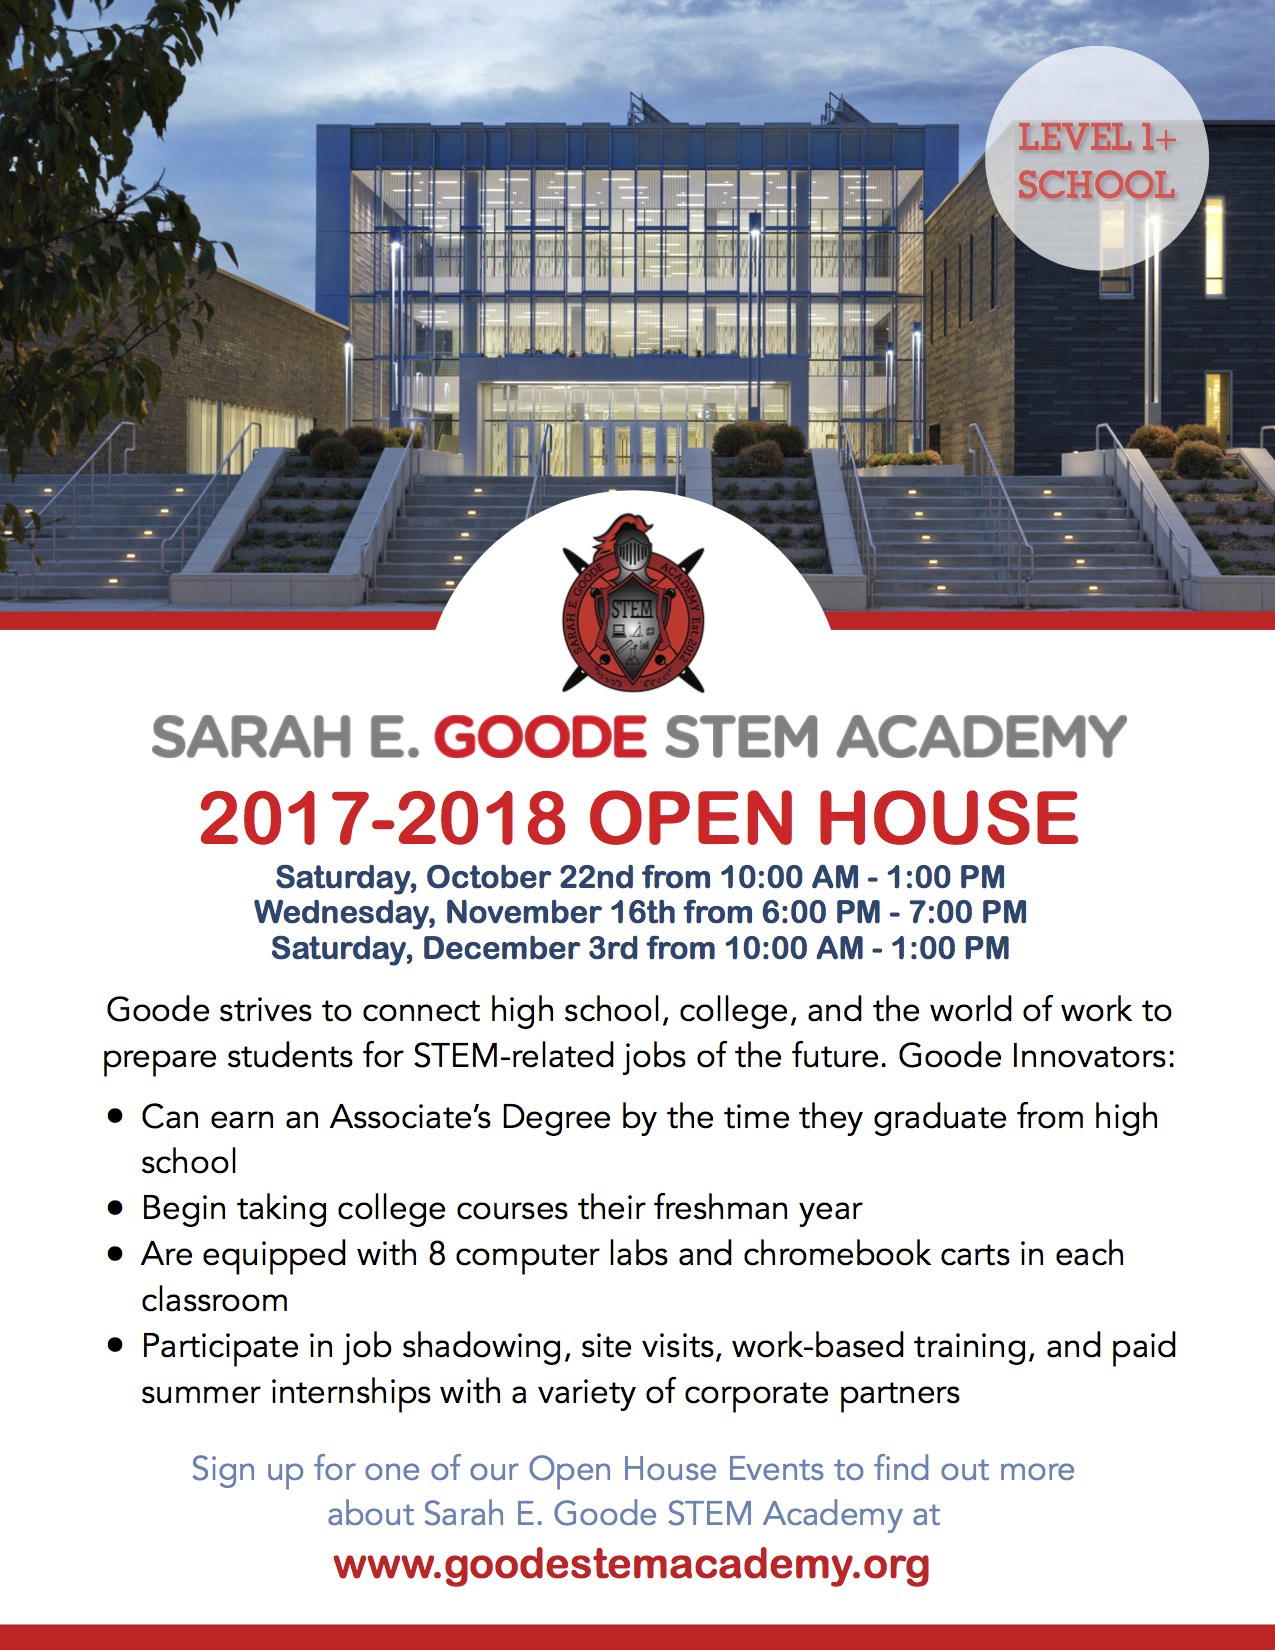 Goode Open House on Saturday, October 22nd